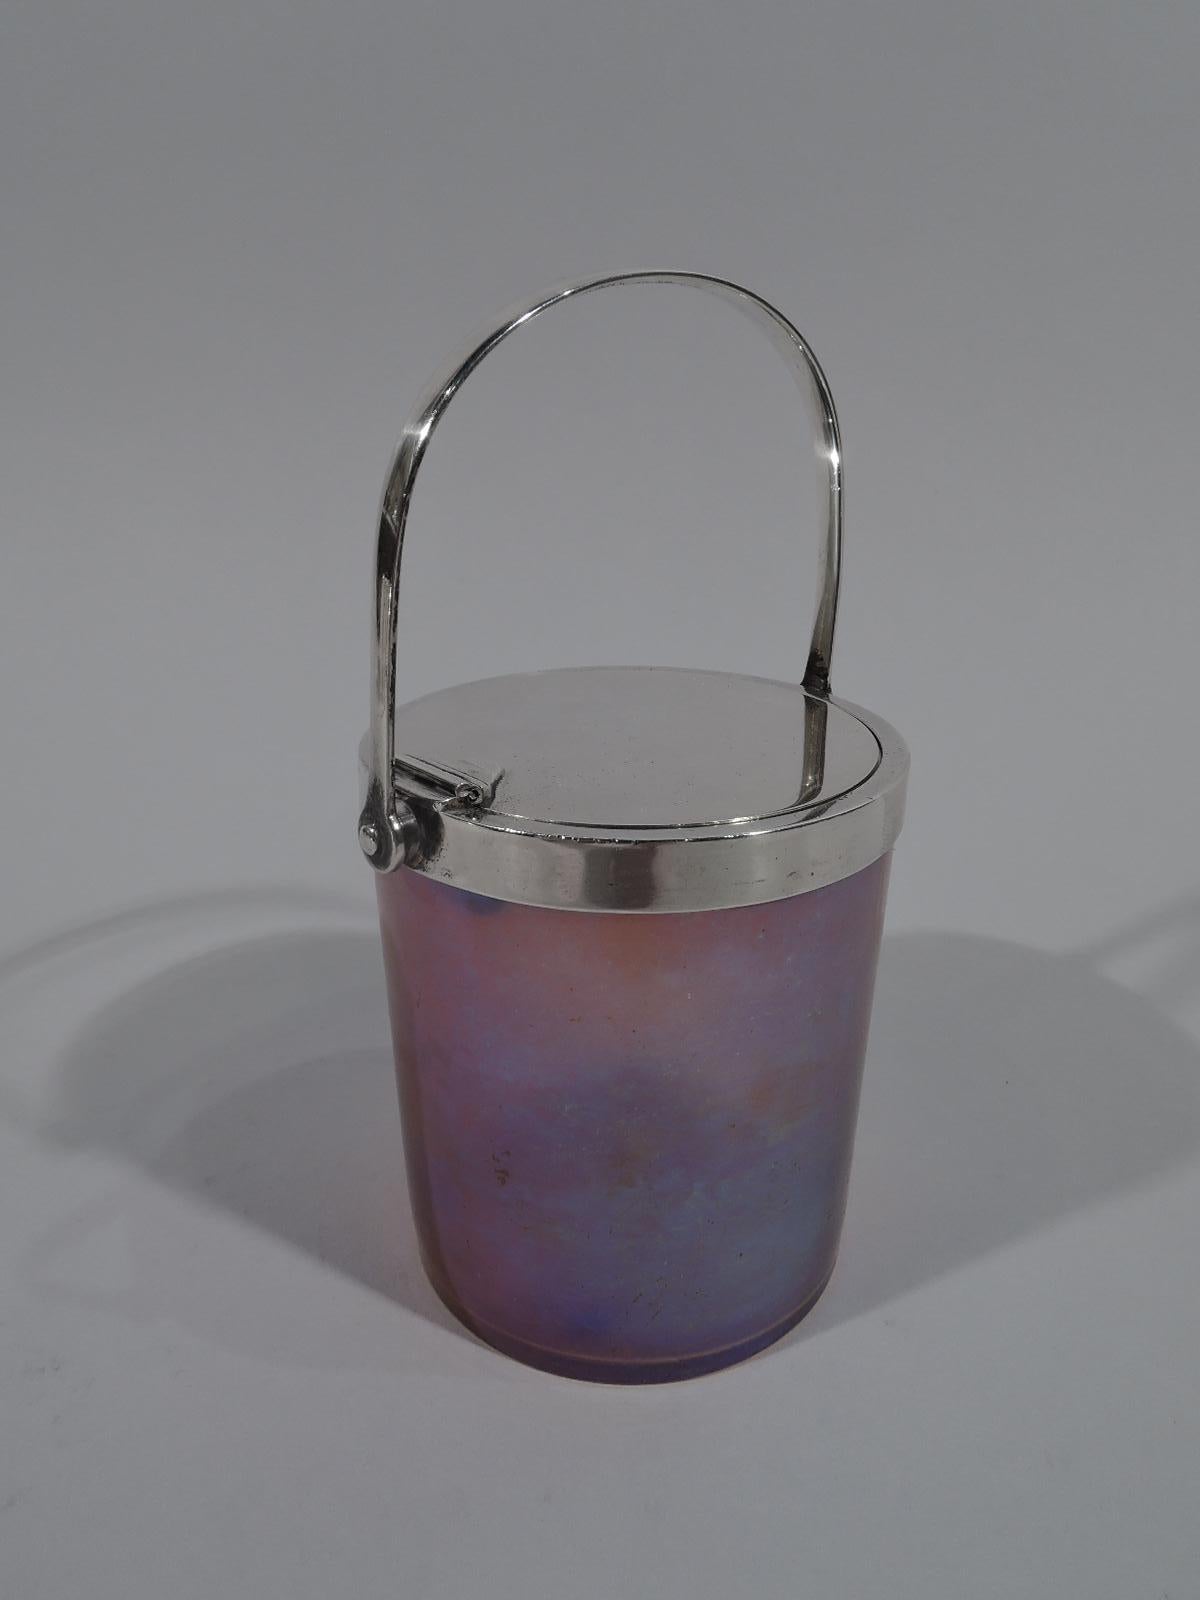 Beautiful Art Nouveau sterling silver and Favrile glass jam pot, circa 1910. Made by Tiffany & Co. in New York. Cylindrical with straight sides. Glass nuanced purple and gold. Pontil mark. Silver collar with flat hinged cover that opens by lowering